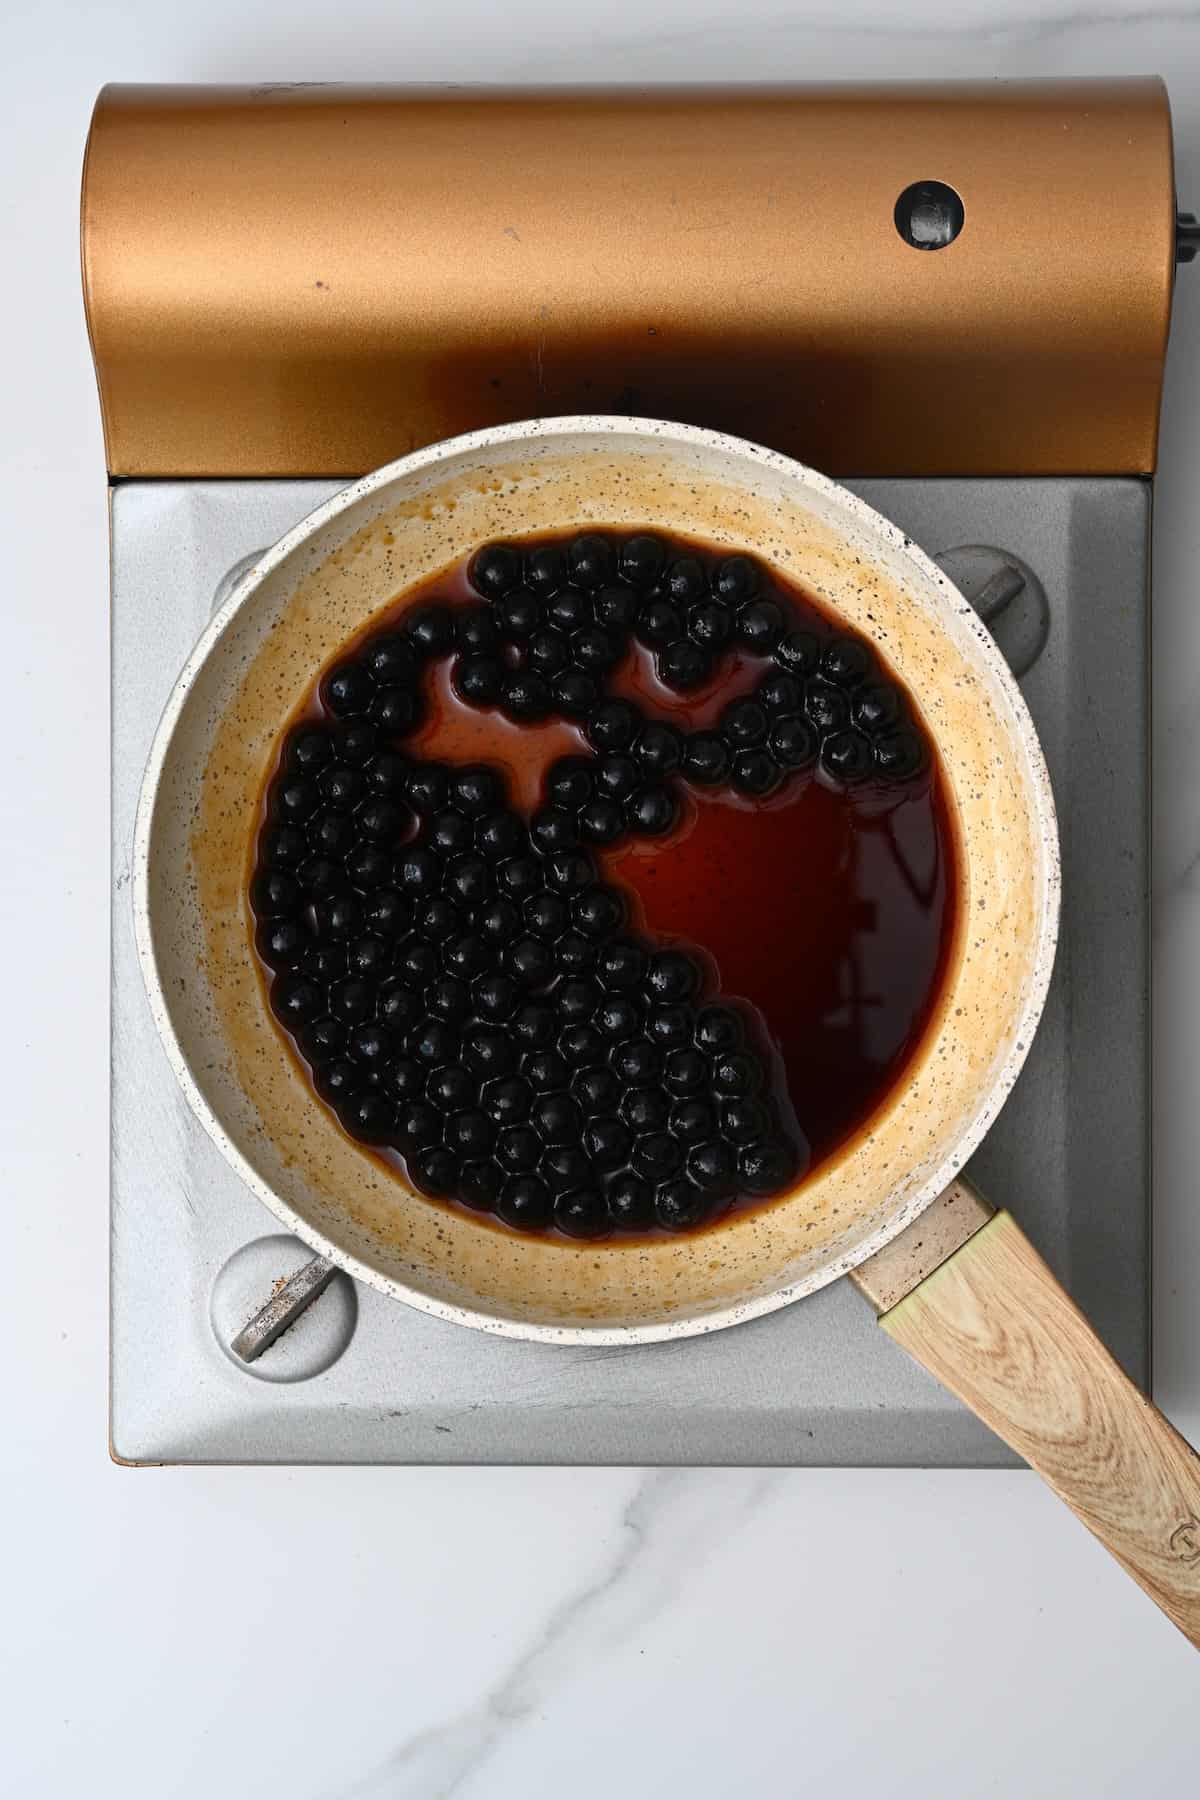 Tapioca pearls in sugar syrup on a pan